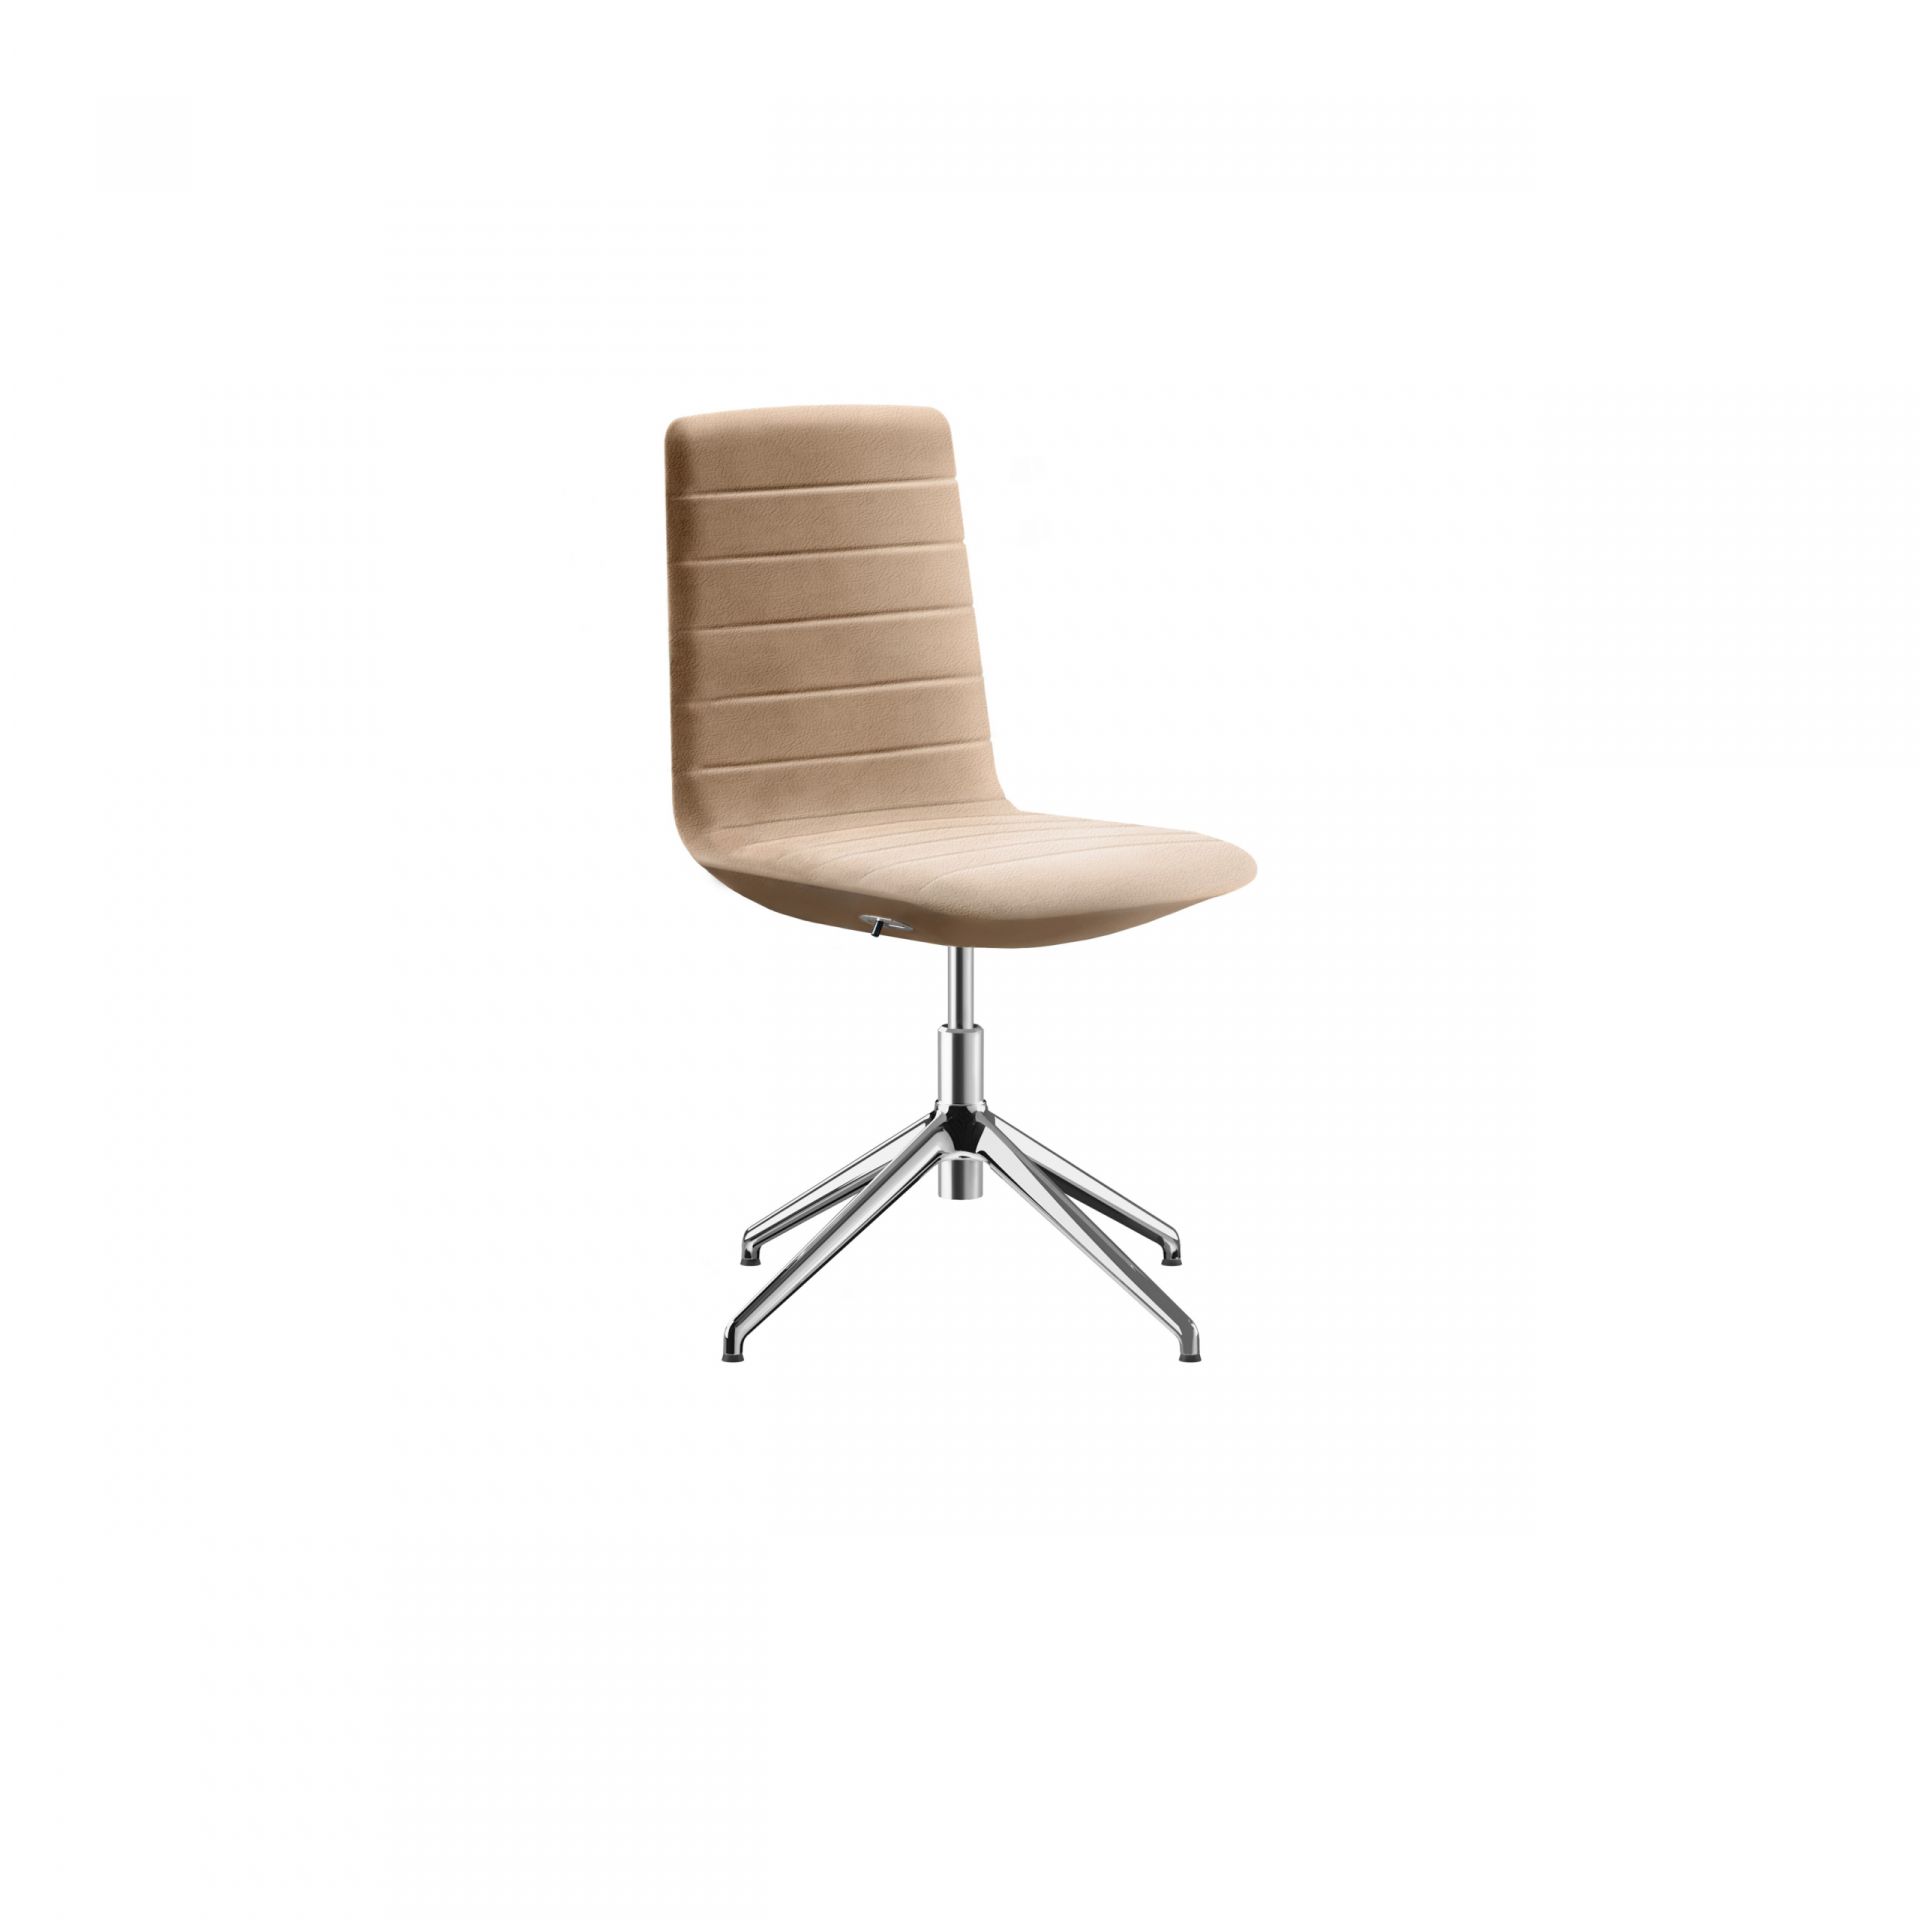 Favor Chair with swivel base product image 3